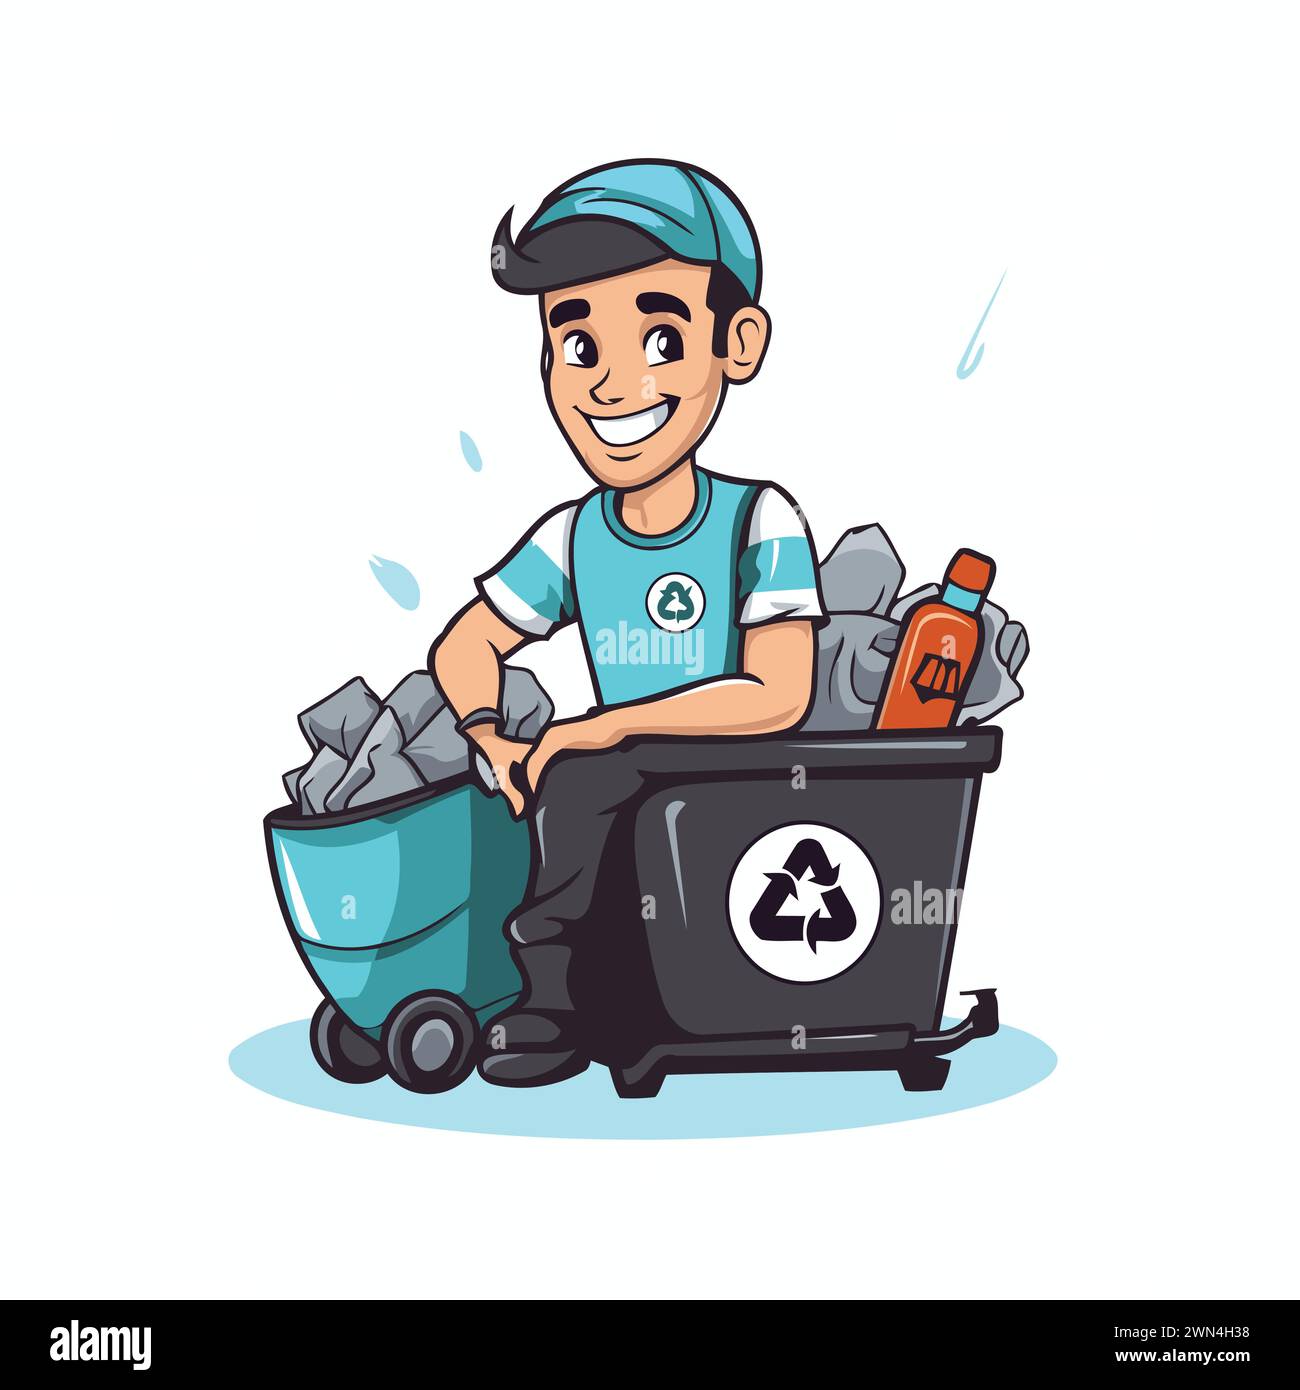 Vector illustration of a cartoon man with a garbage bin full of garbage. Stock Vector